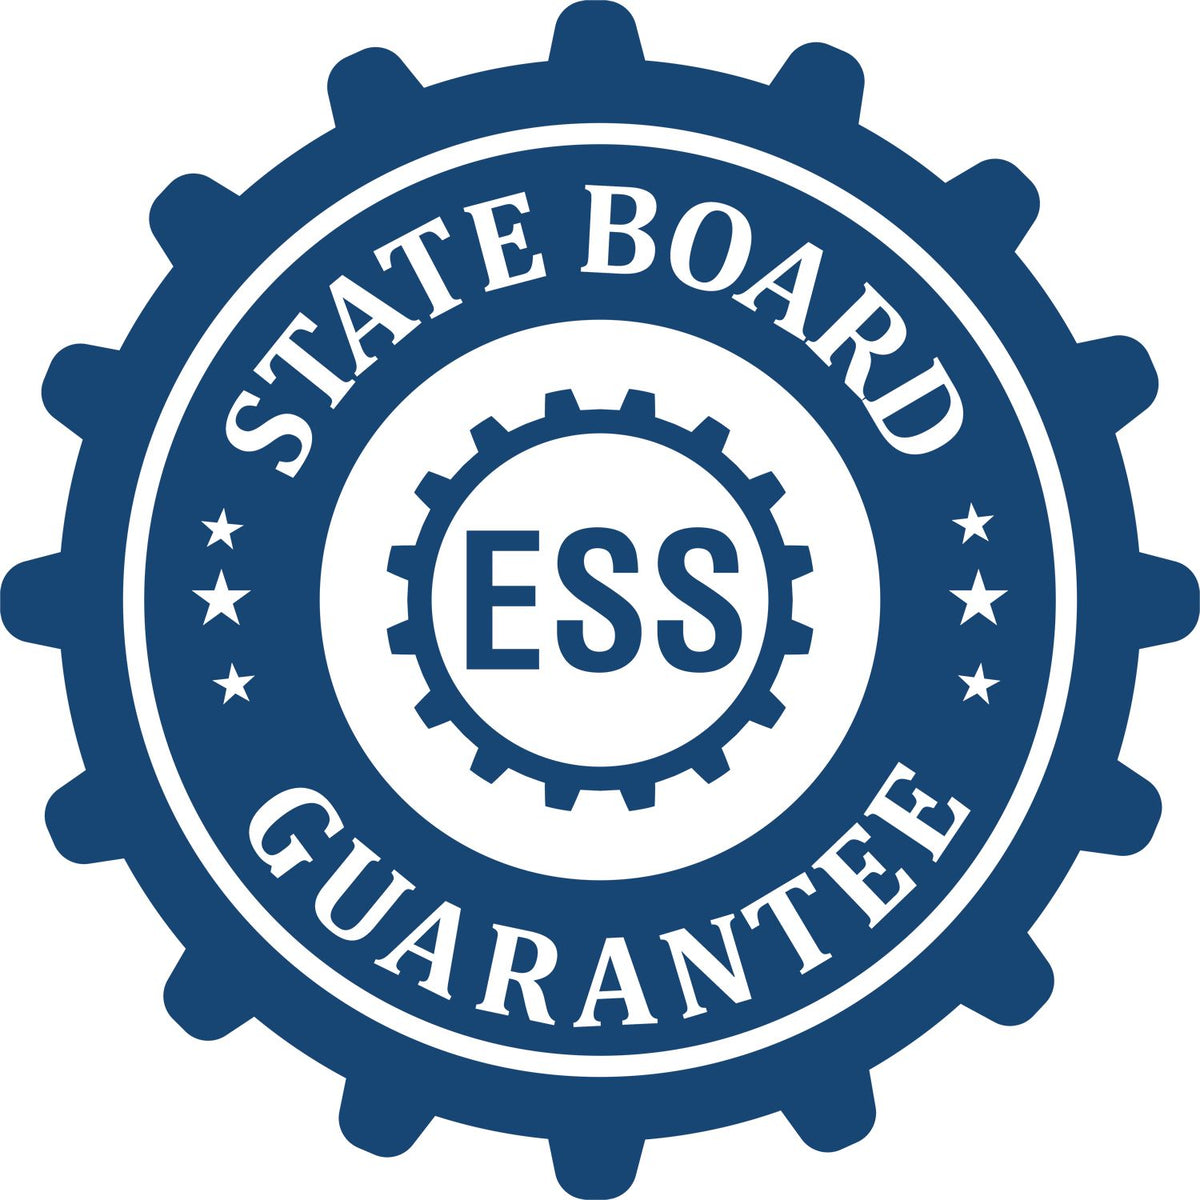 An emblem in a gear shape illustrating a state board guarantee for the State of Iowa Extended Long Reach Geologist Seal